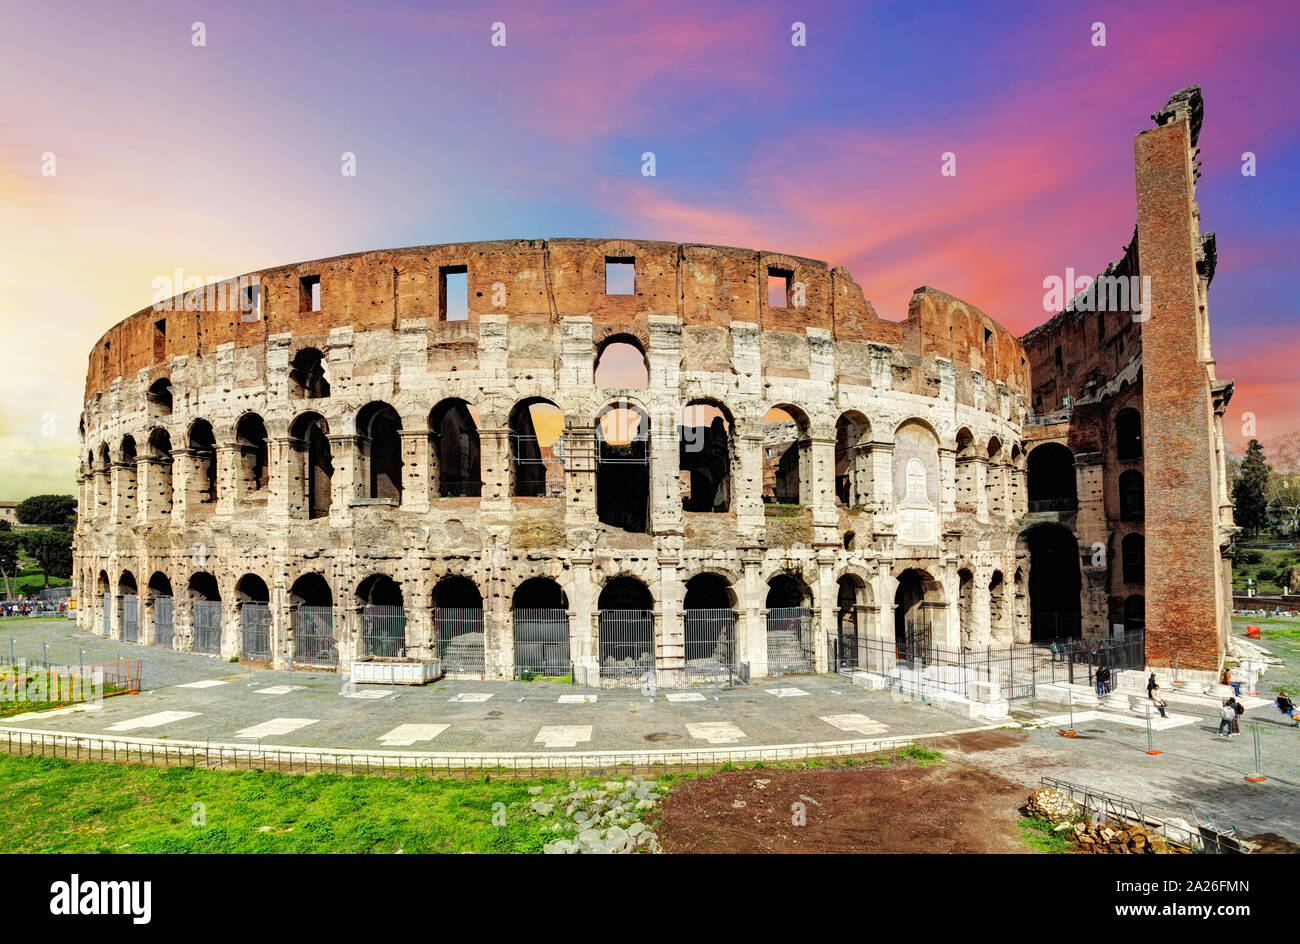 Colosseum in Rome at sunset, Italy Stock Photo